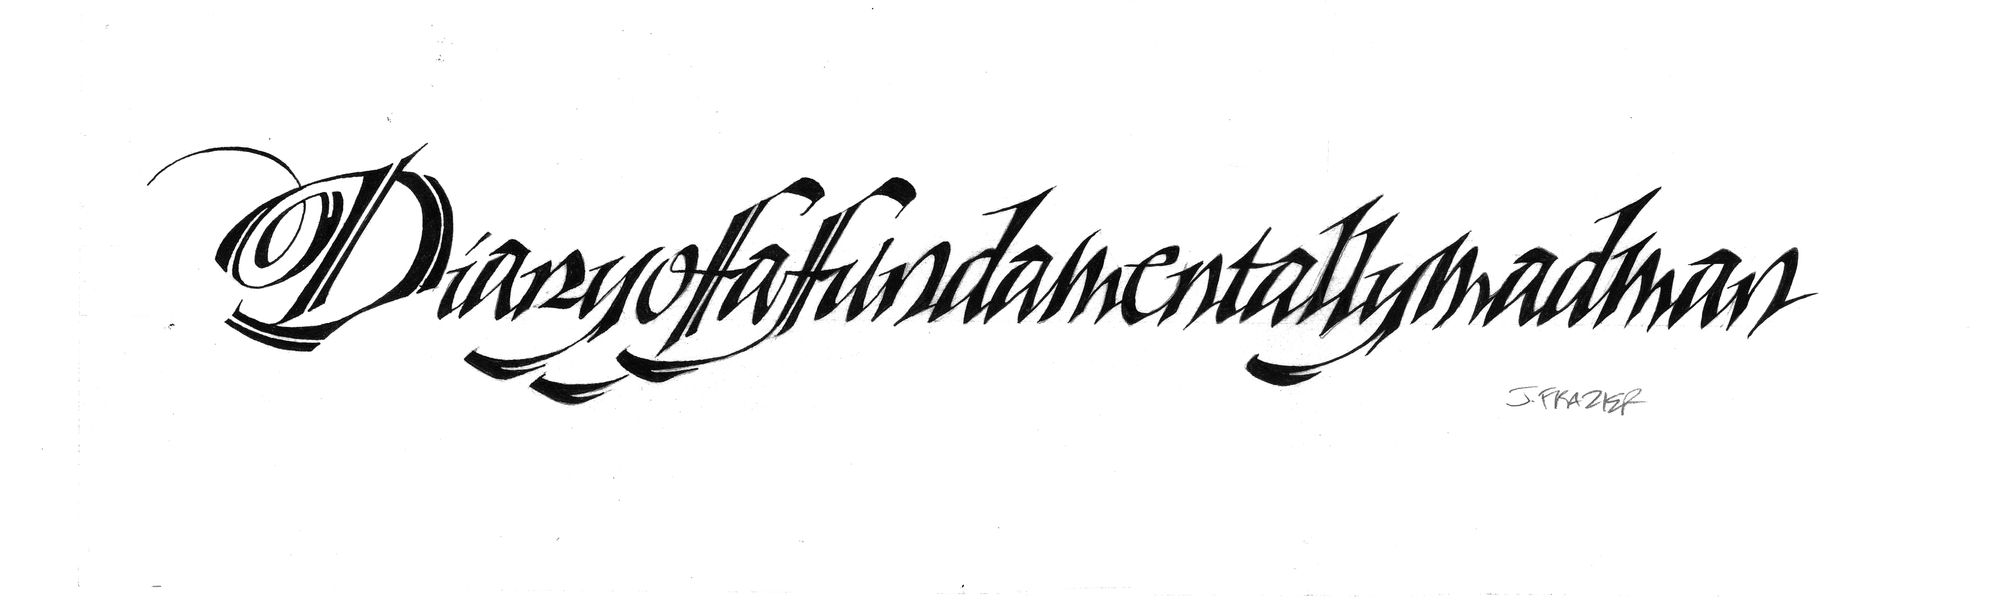 Italic writing that reads 'Diary of a fundamentally mad man'.